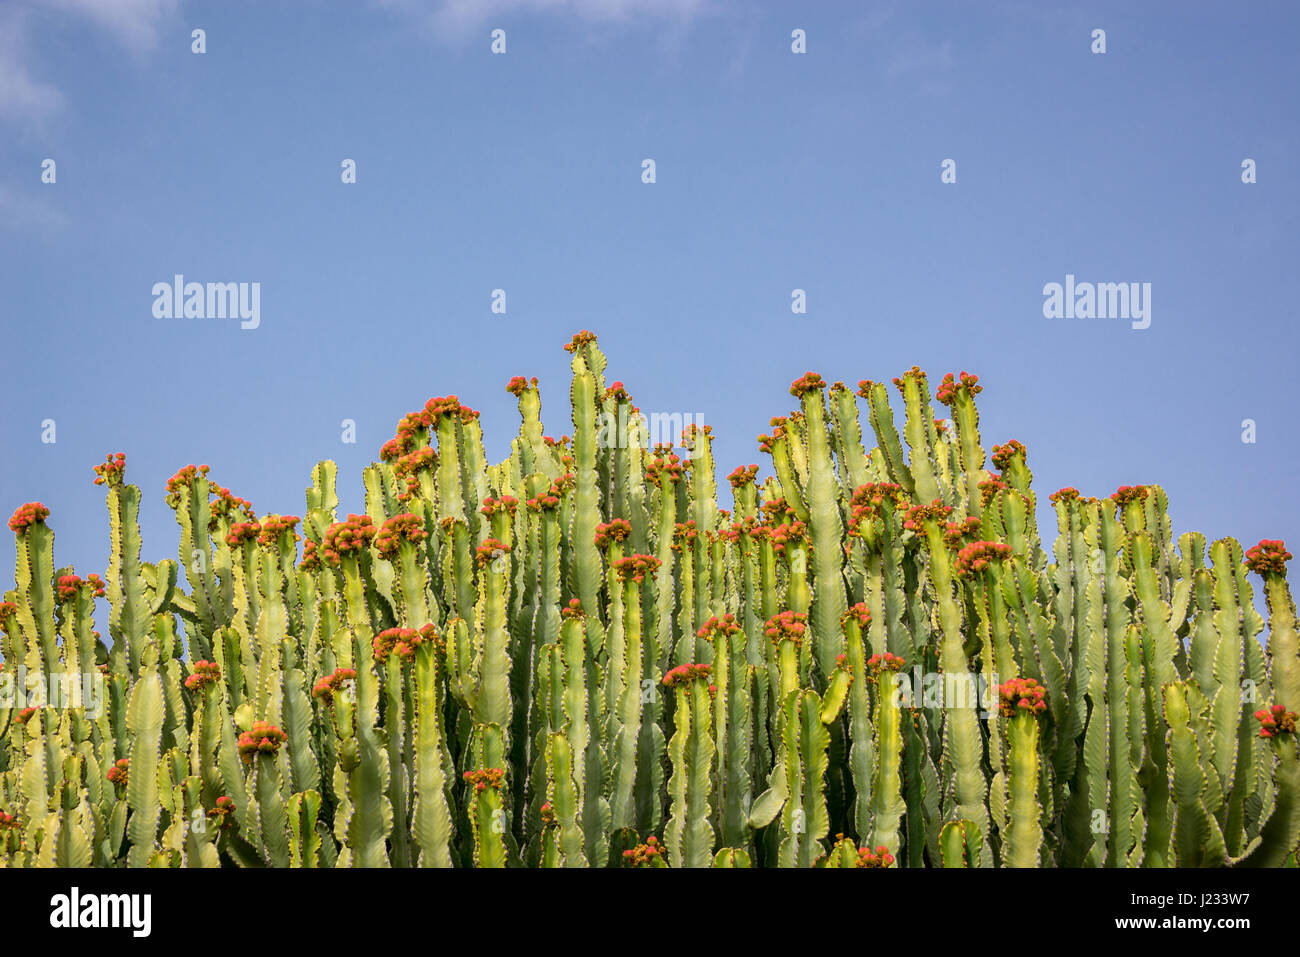 Abstract artistic view of Euphorbia candelabrum, a giant succulent plant Stock Photo